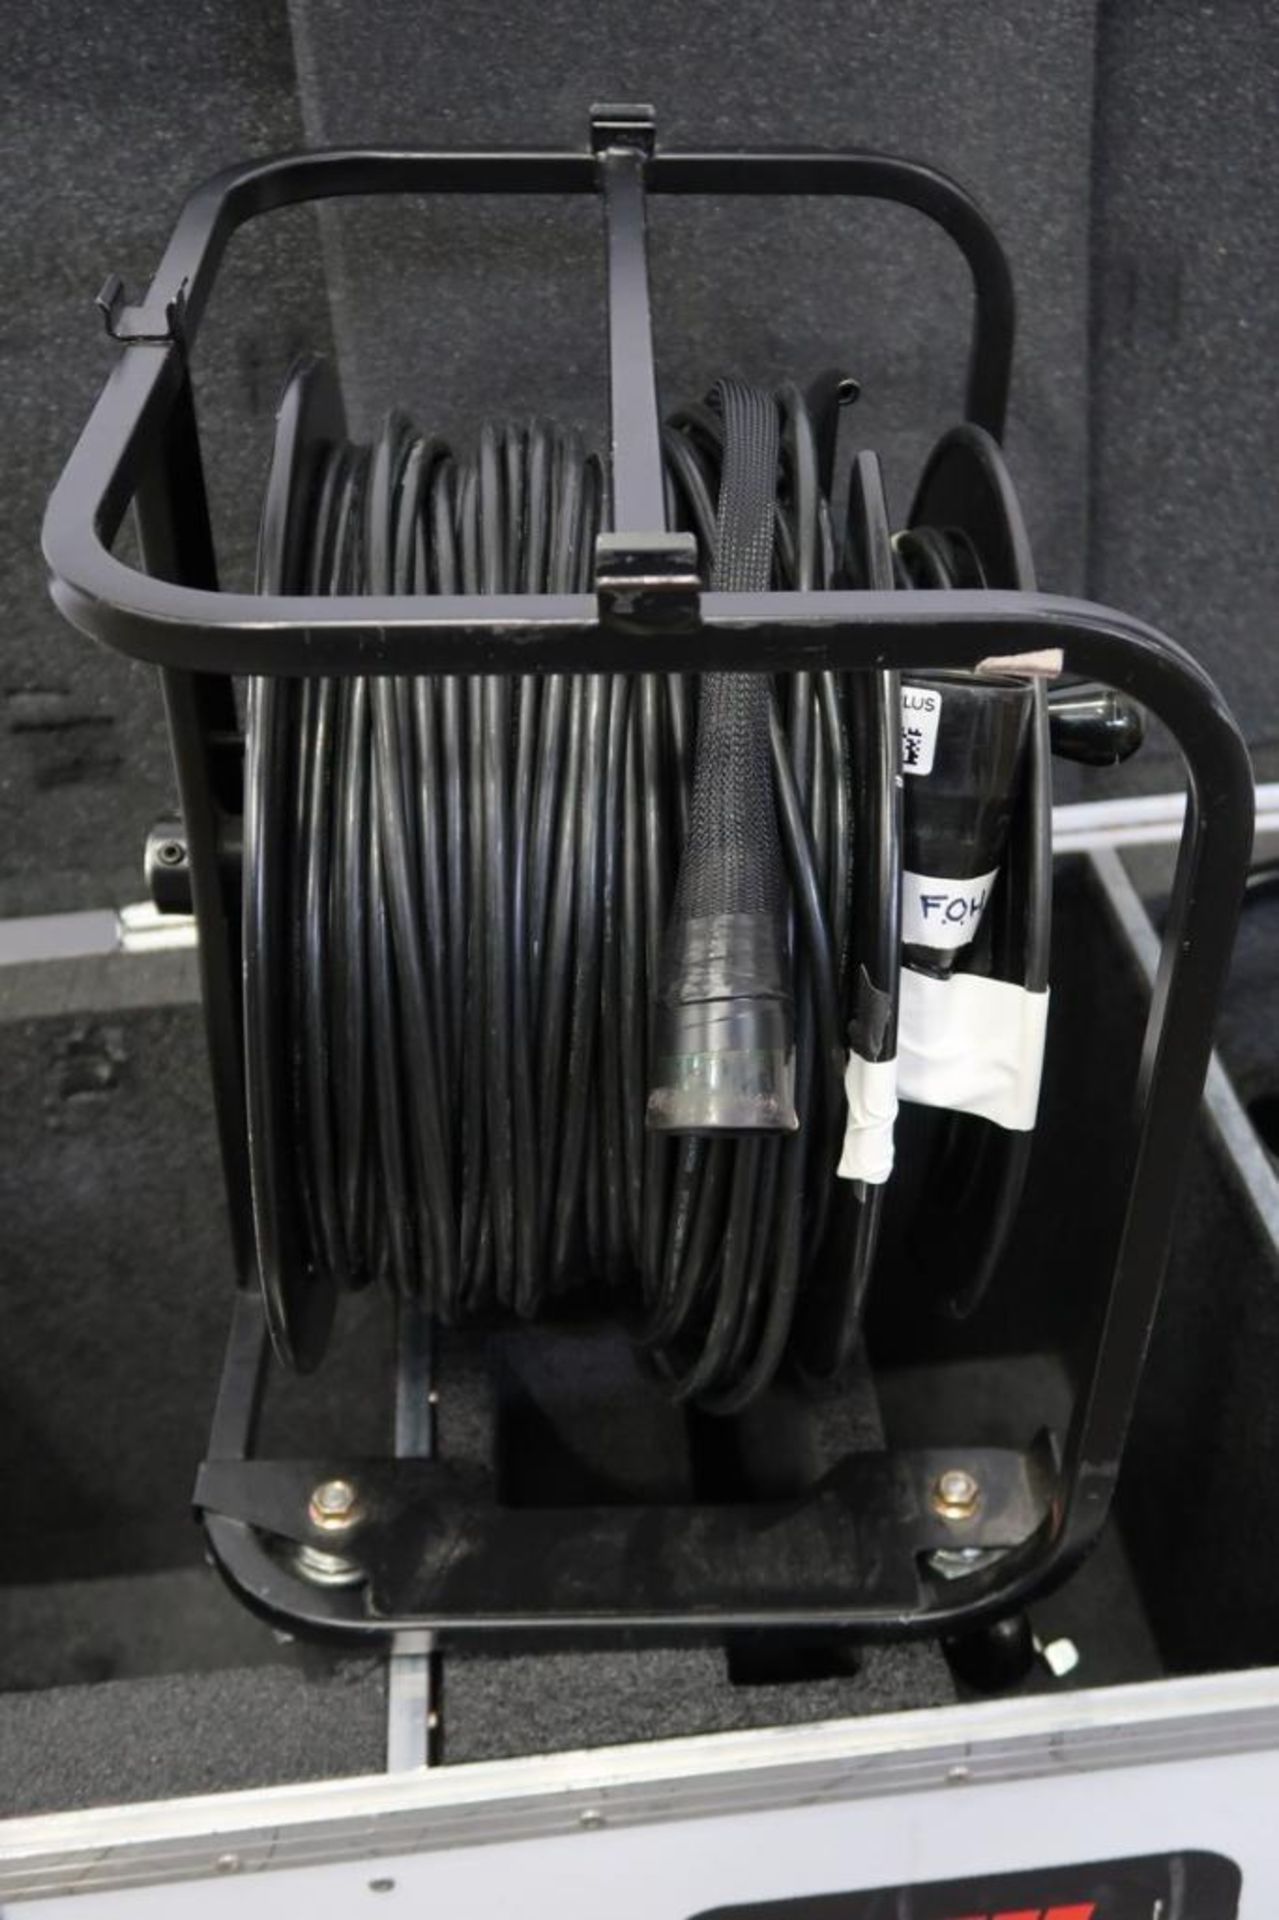 Lot of (2) 500' TAC4 Fiber Cable ReelsMT Cases 3-Section Chest Case - Image 5 of 6